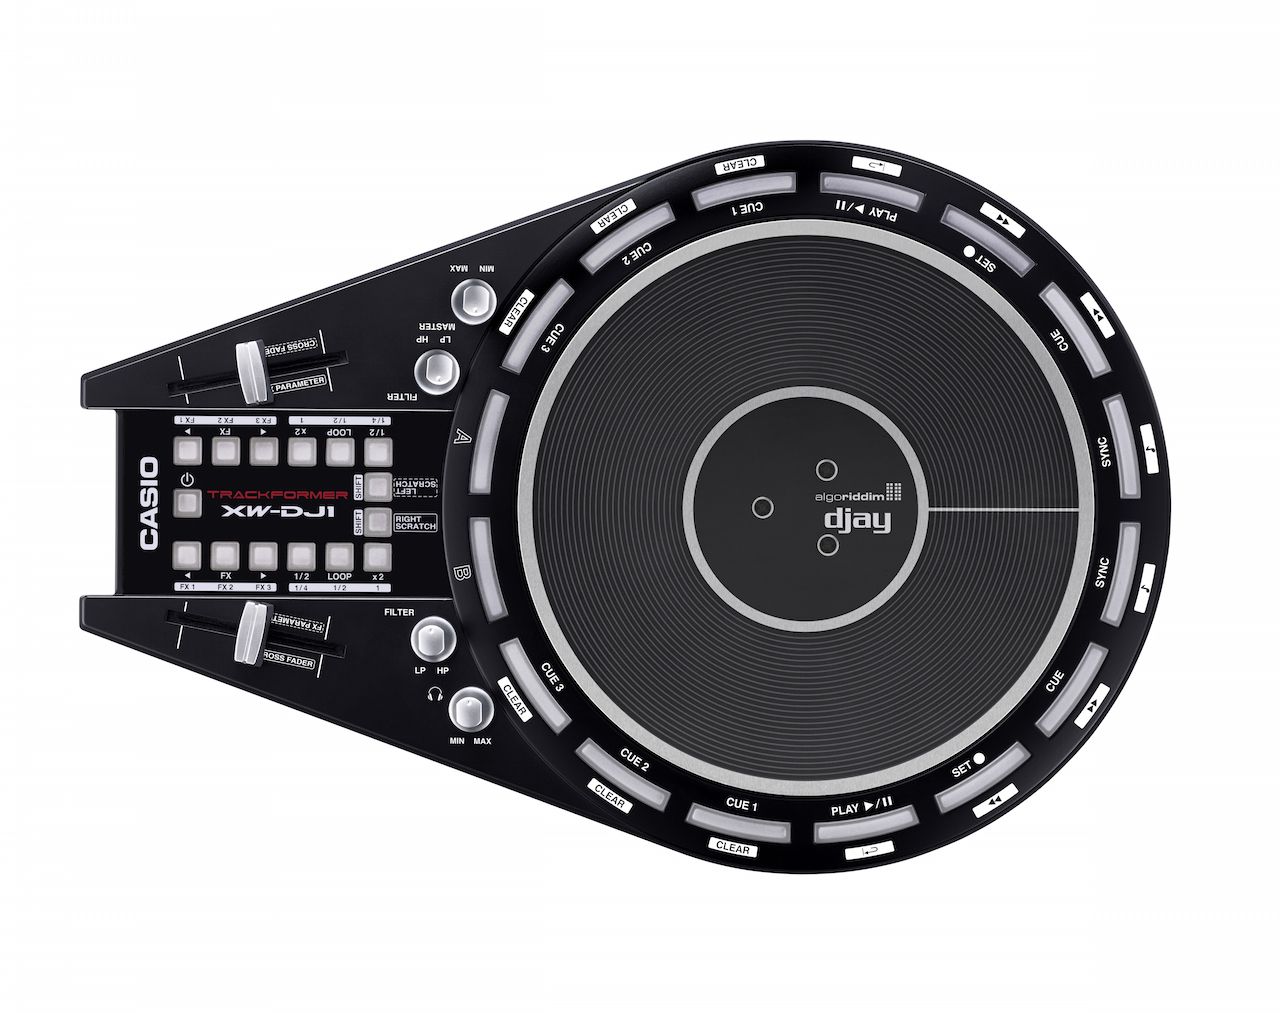 Korg announces portable turntable with built-in looper and FX